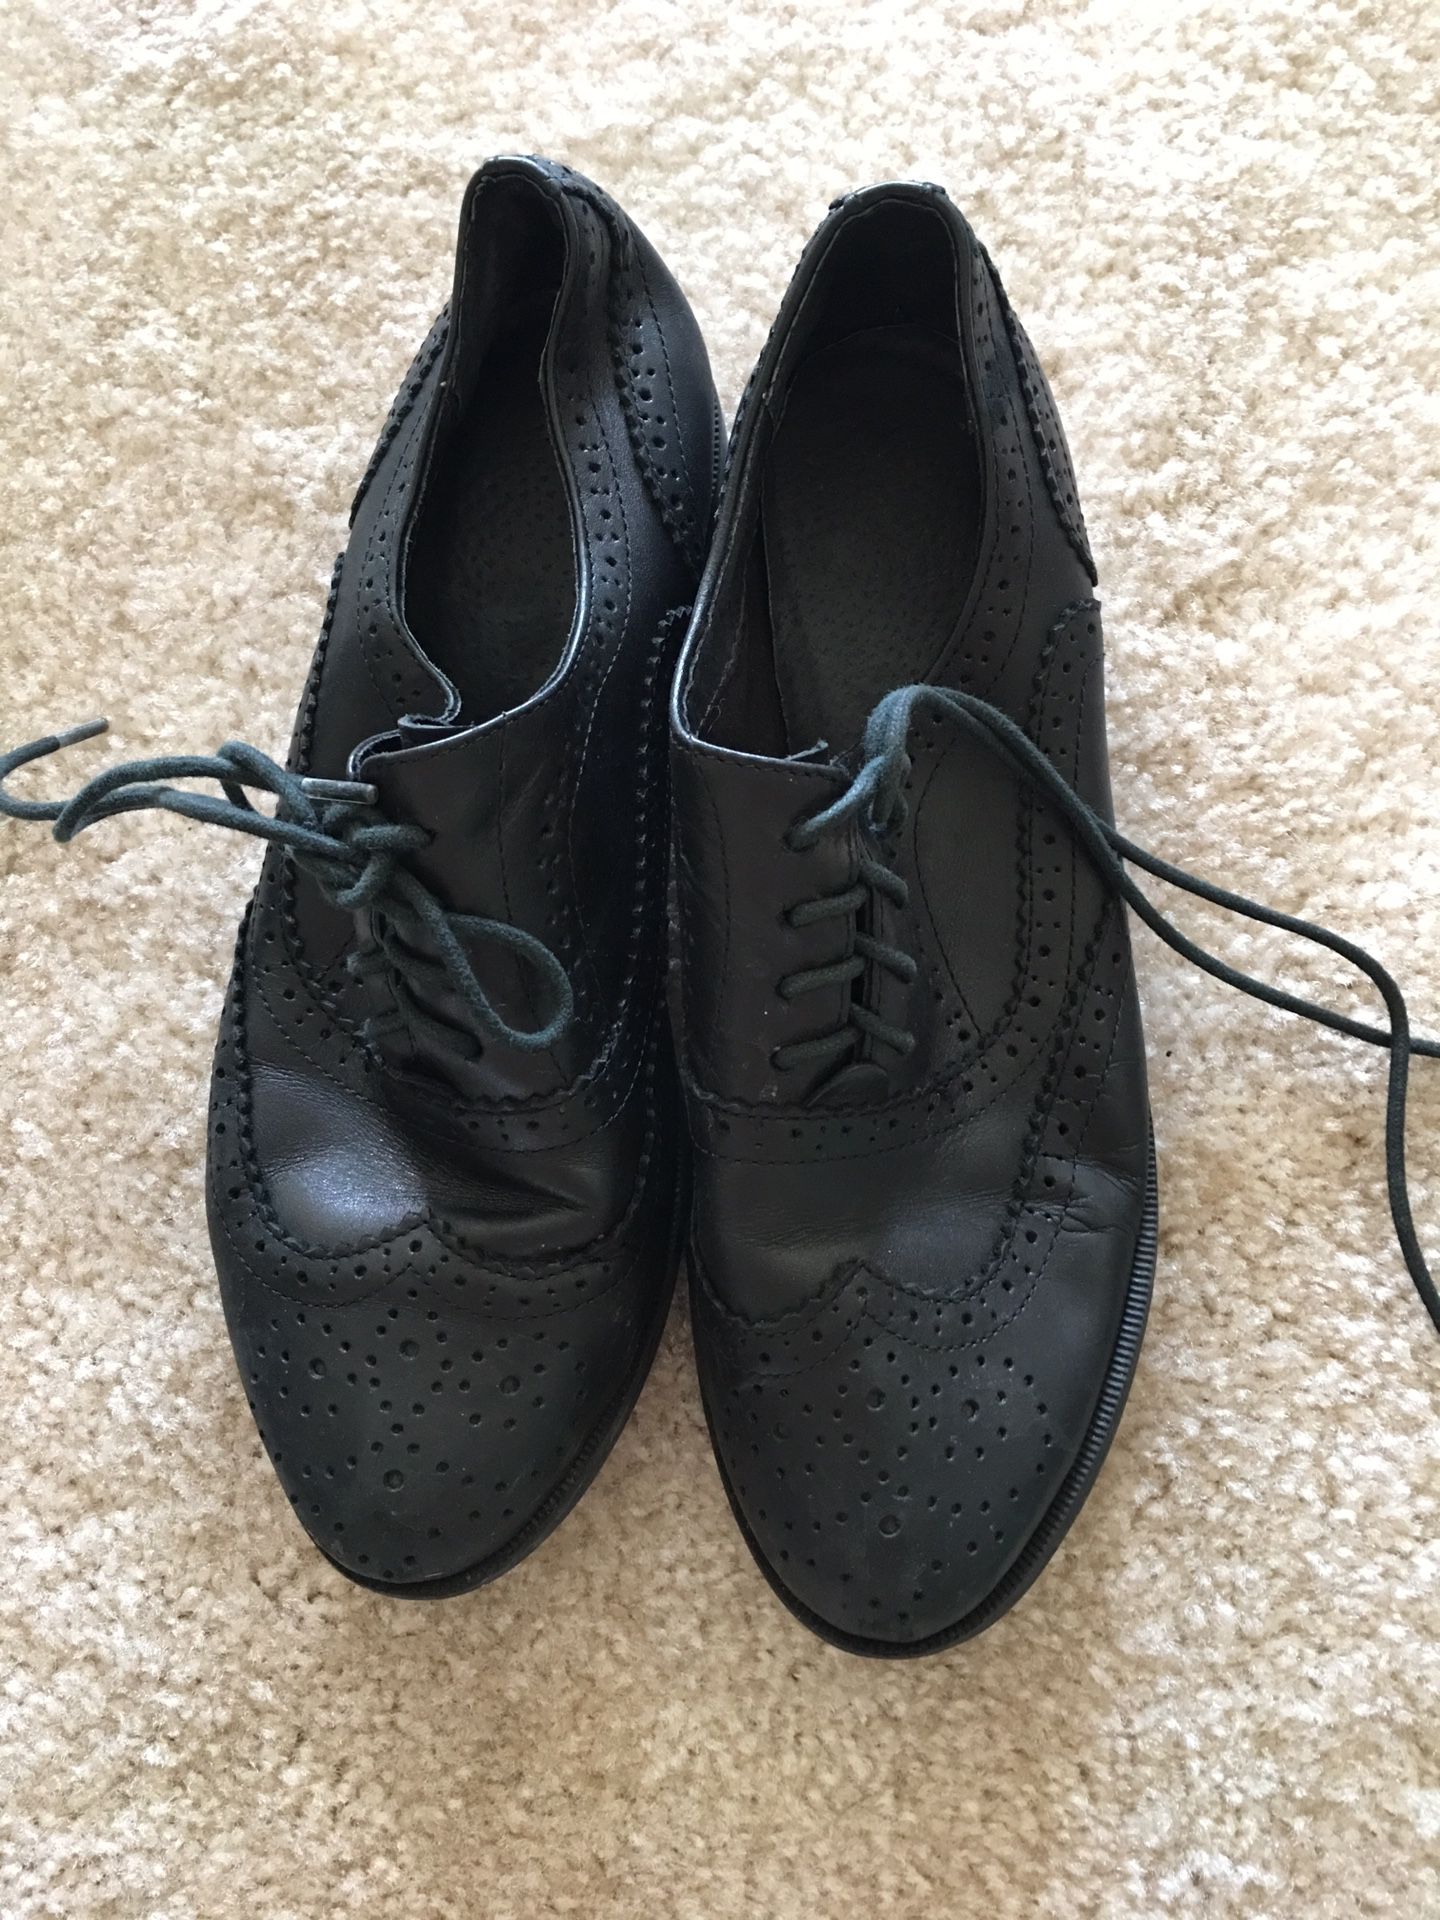 Oxford bootie in black. Soft leather size 6.5/37